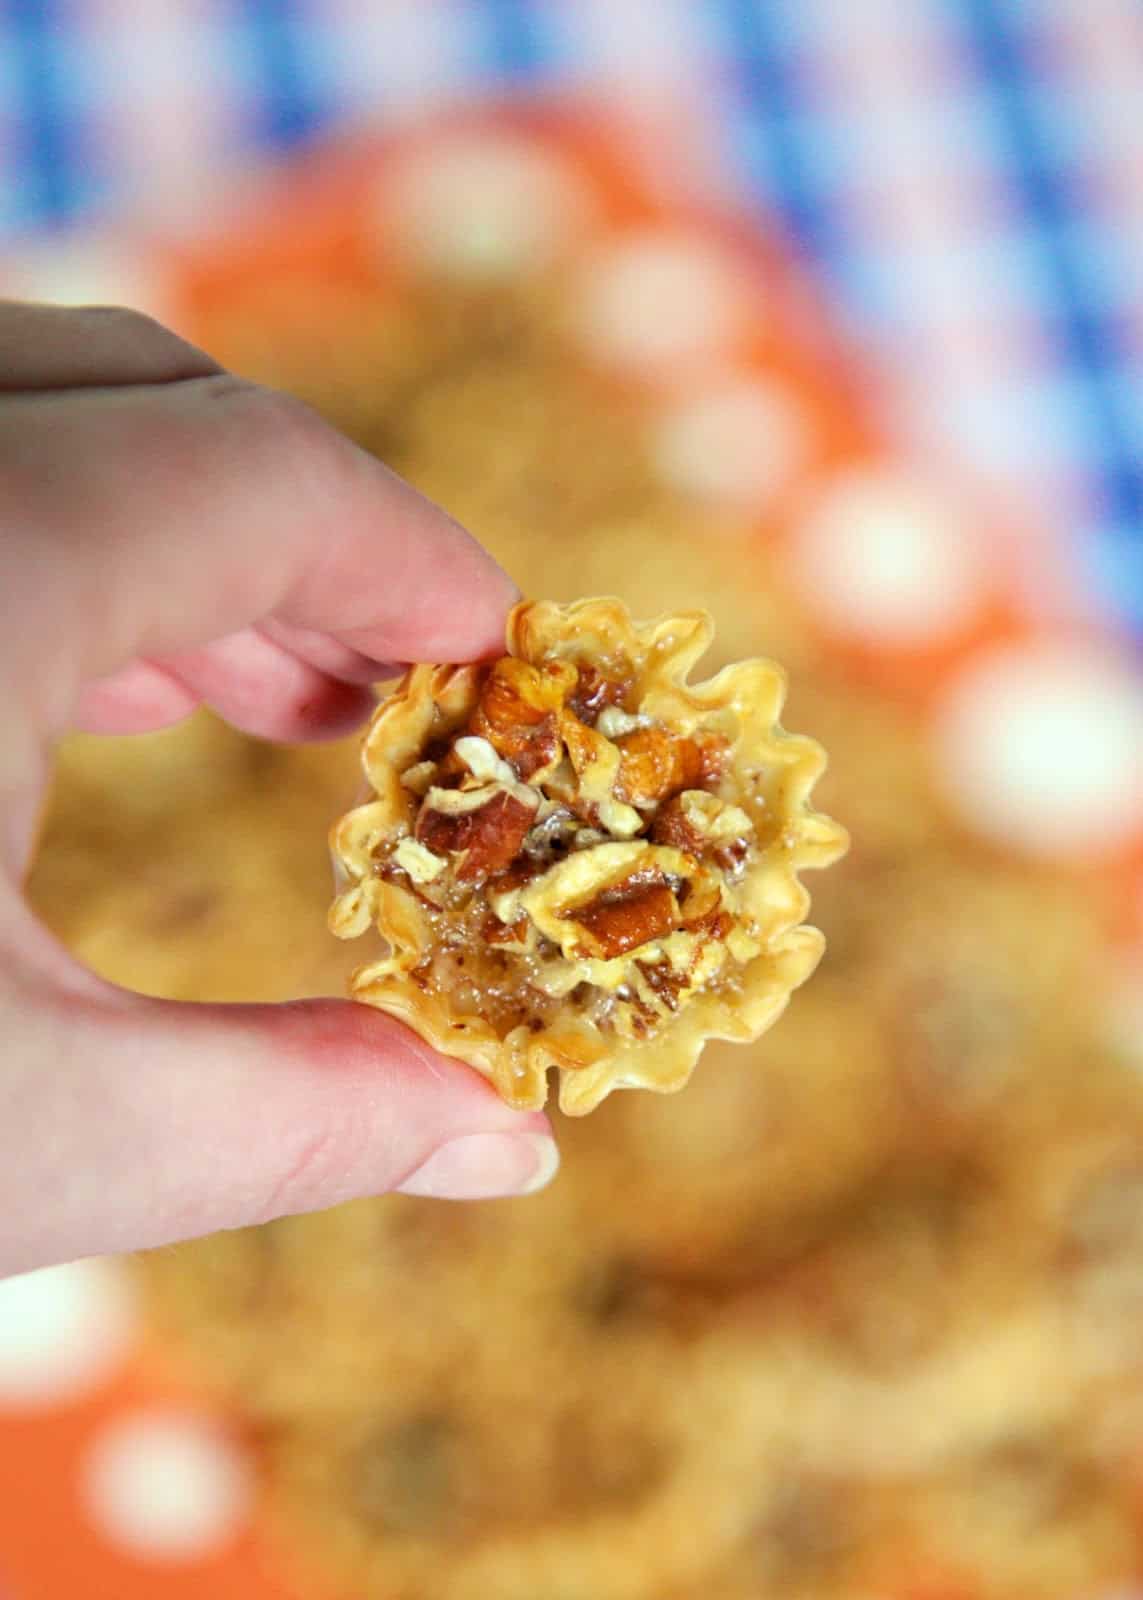 Pecan Pie Bites - pecan pie filling baked in a phyllo shell - great for parties, tailgating or Thanksgiving! Everyone LOVES these bite-sized pecan pie bites! Can make ahead of time and store in an airtight container for several days. Such a great easy dessert recipe!